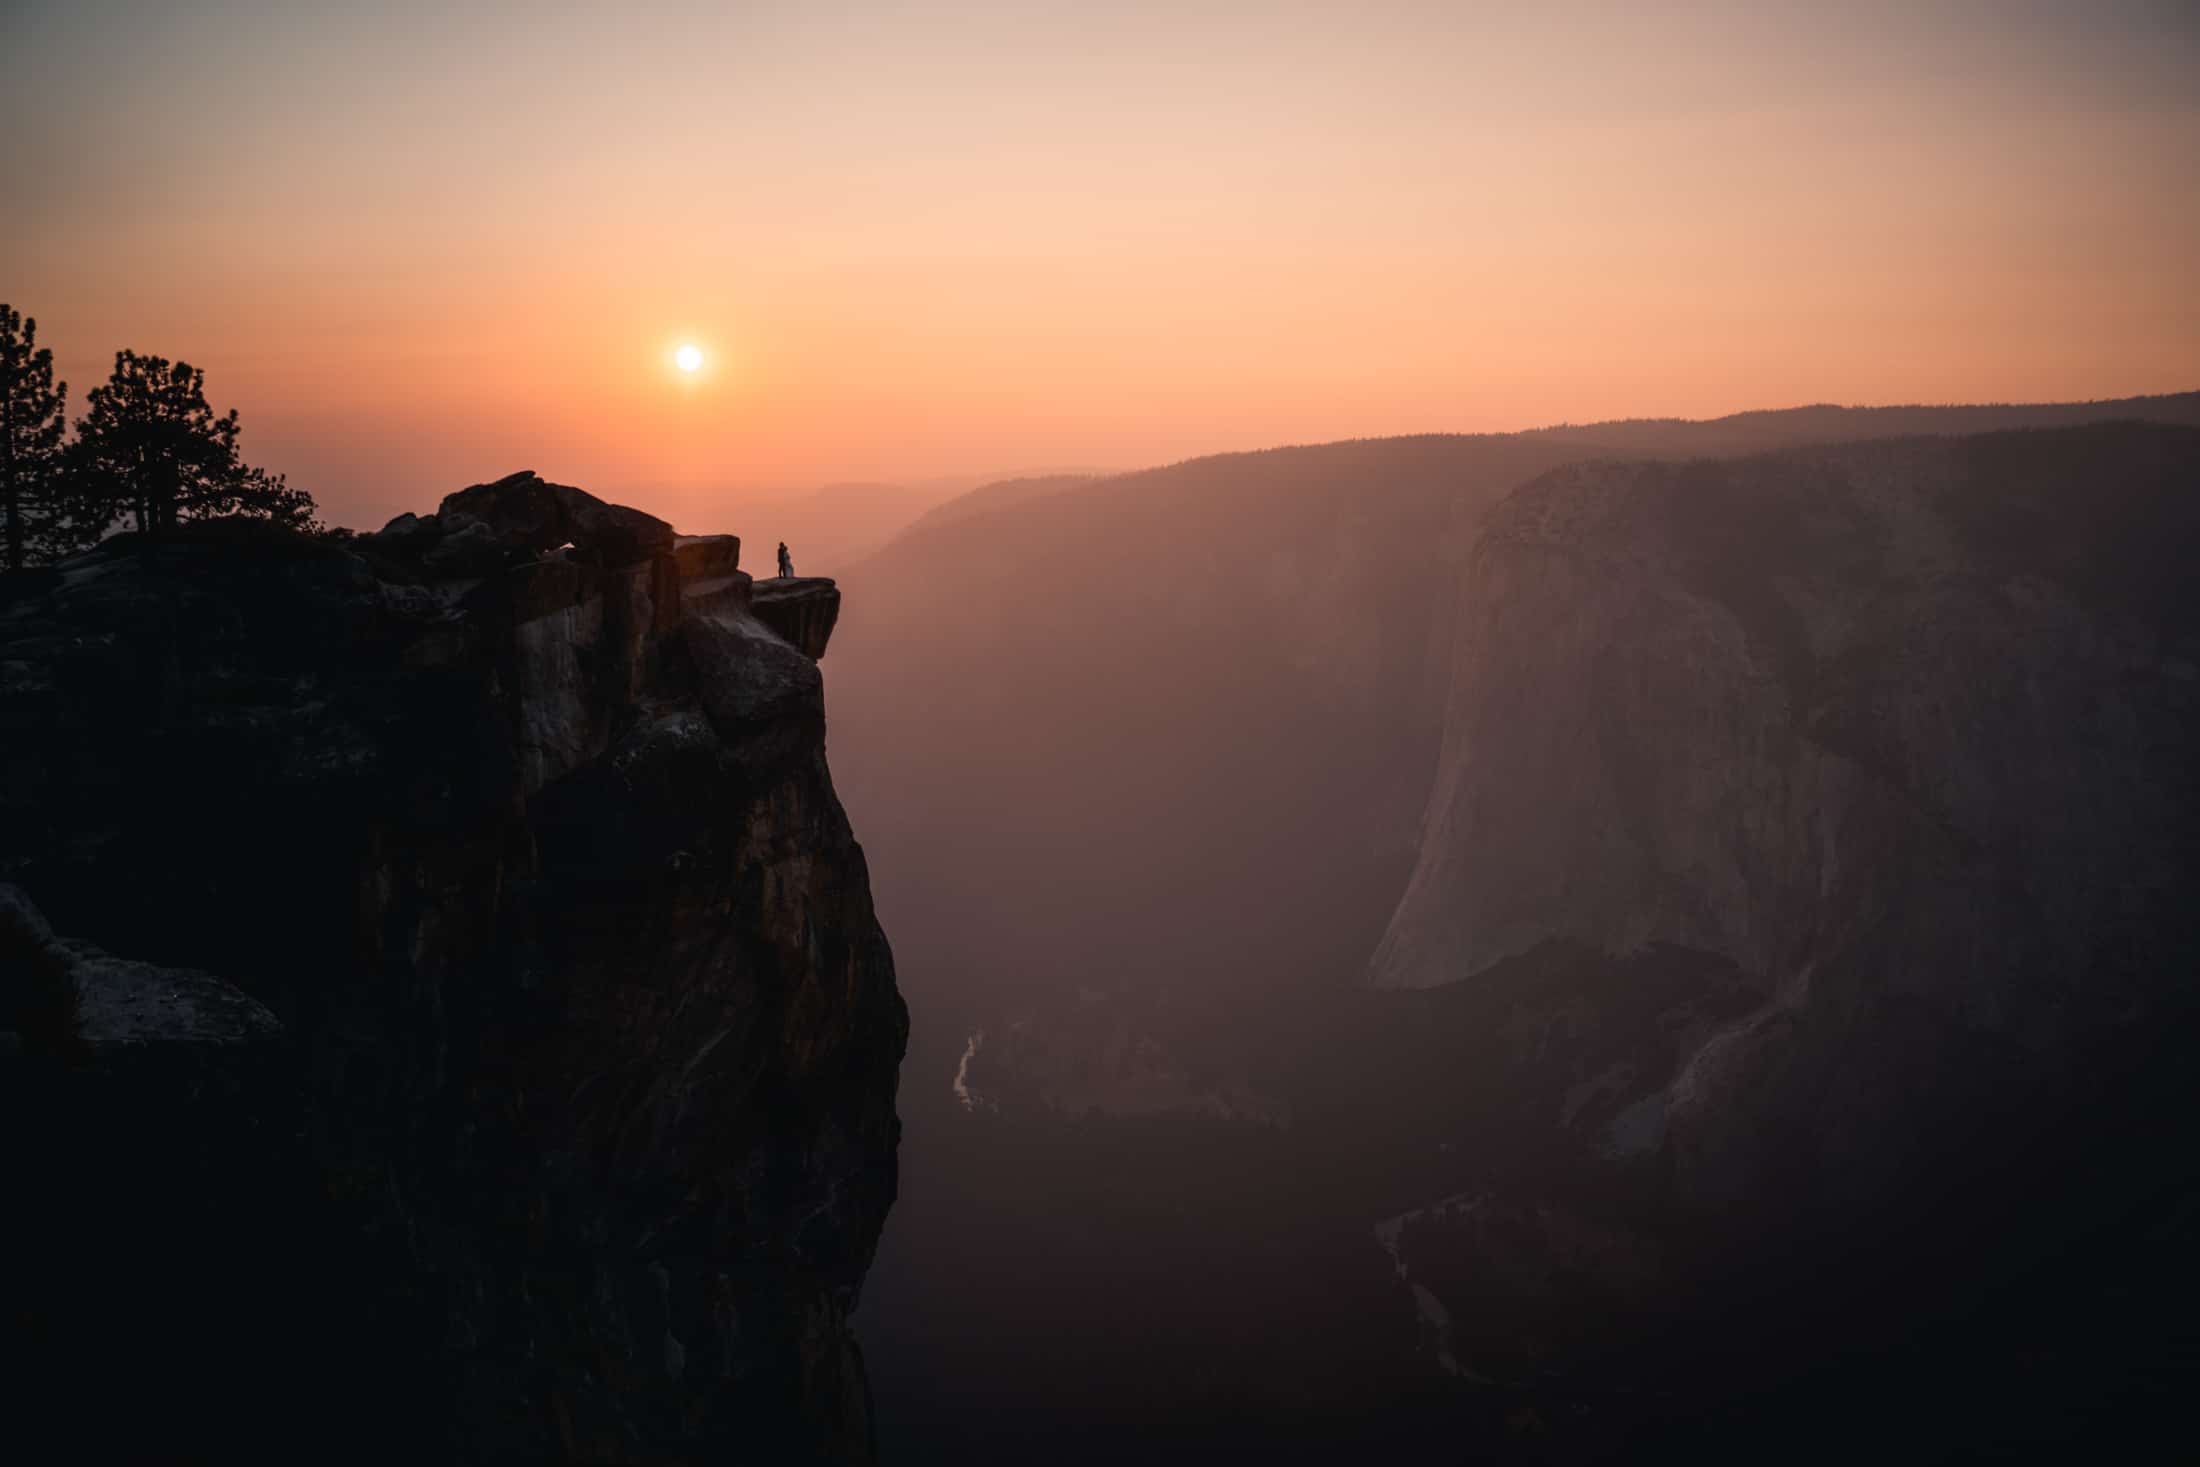 A solitary figure stands on the edge of Taft Point in Yosemite at sunset, overlooking the vast valley with the sun casting a warm glow over the granite cliffs and the silhouette of the distant mountains